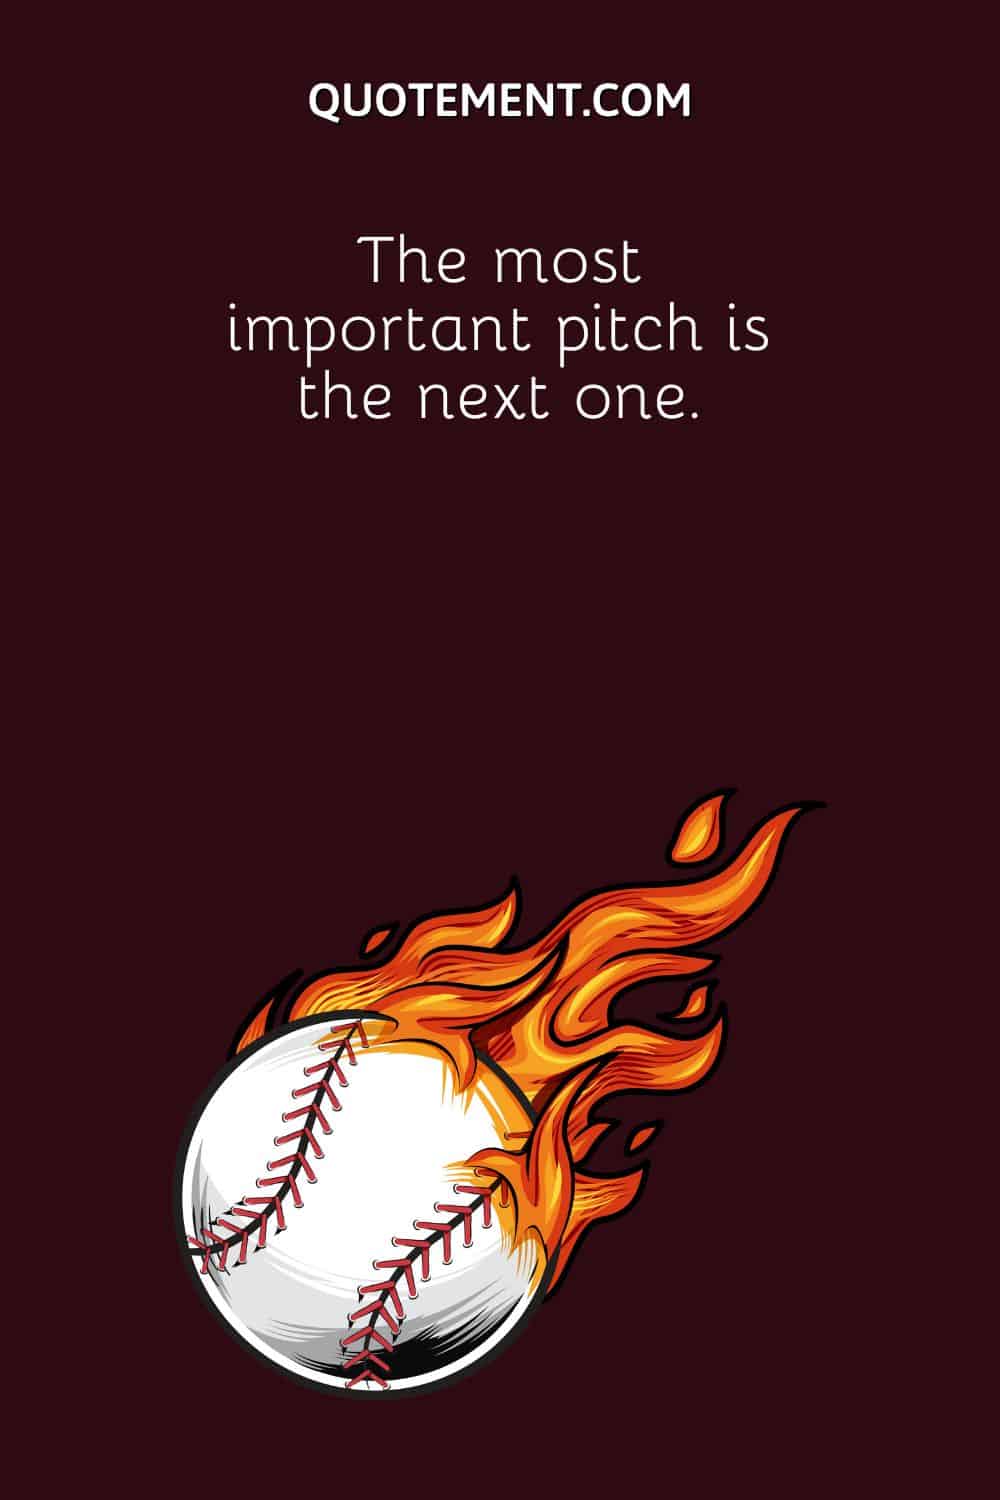 The most important pitch is the next one